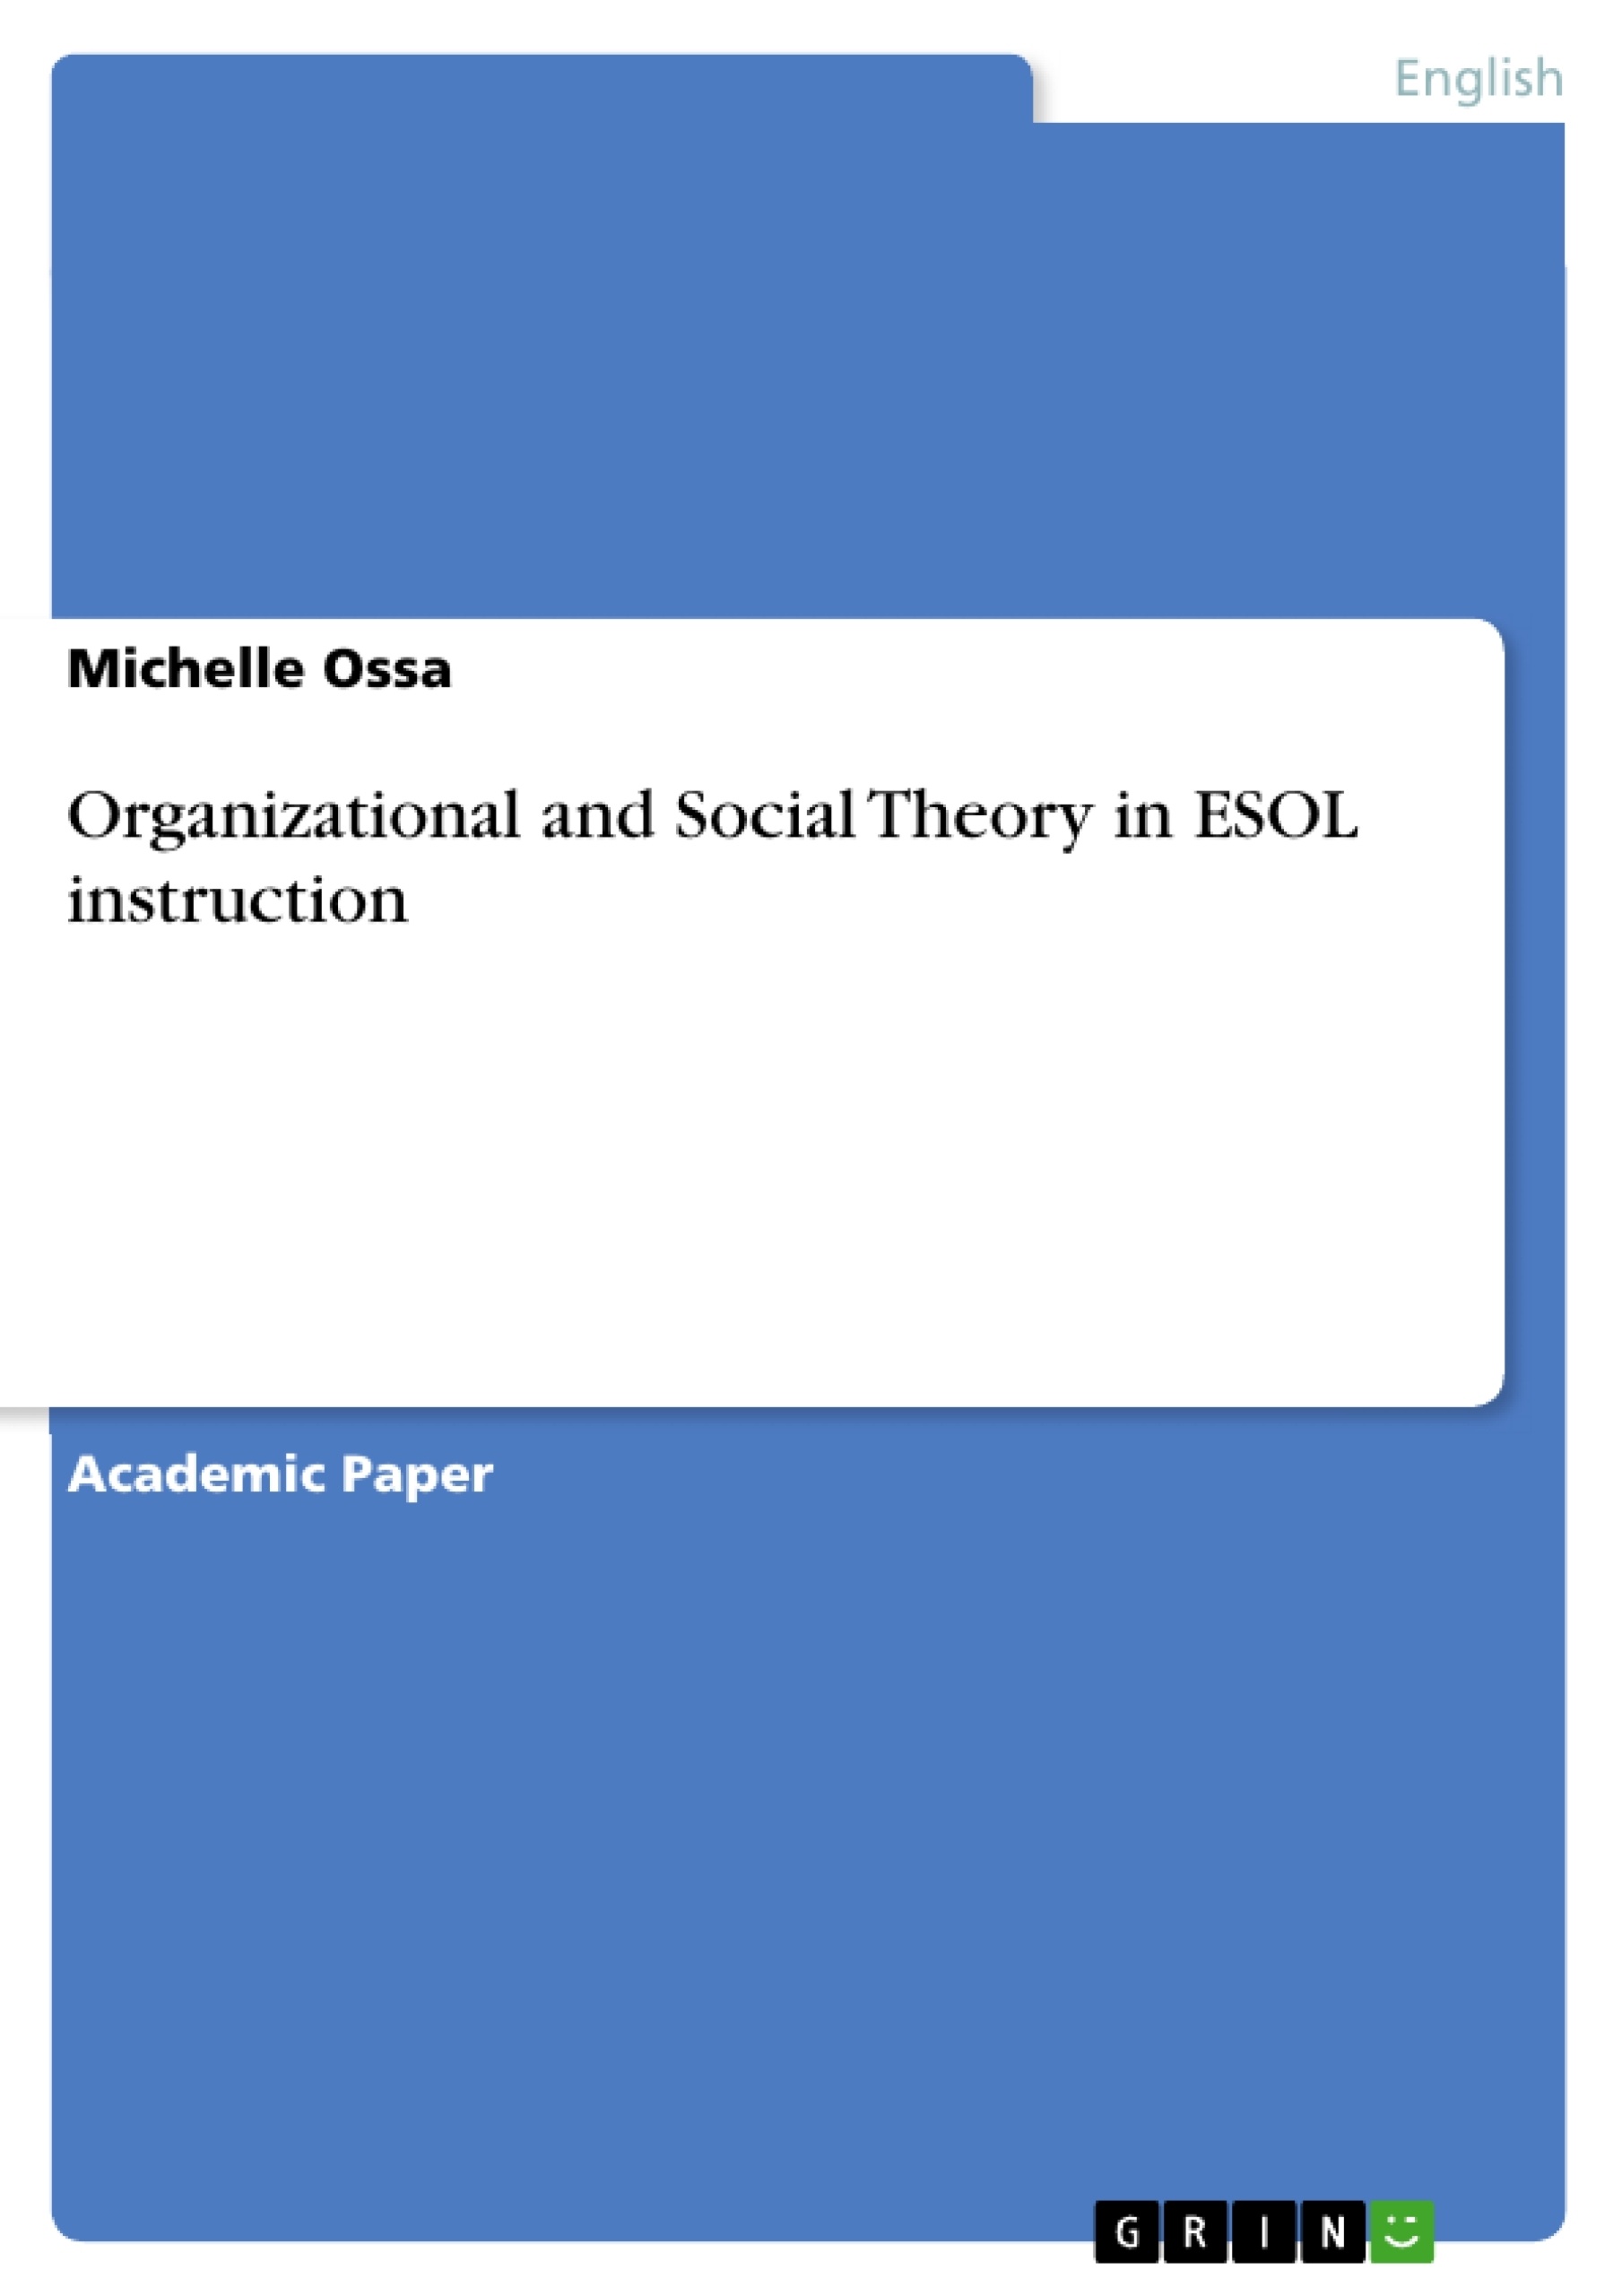 Title: Organizational and Social Theory in ESOL instruction